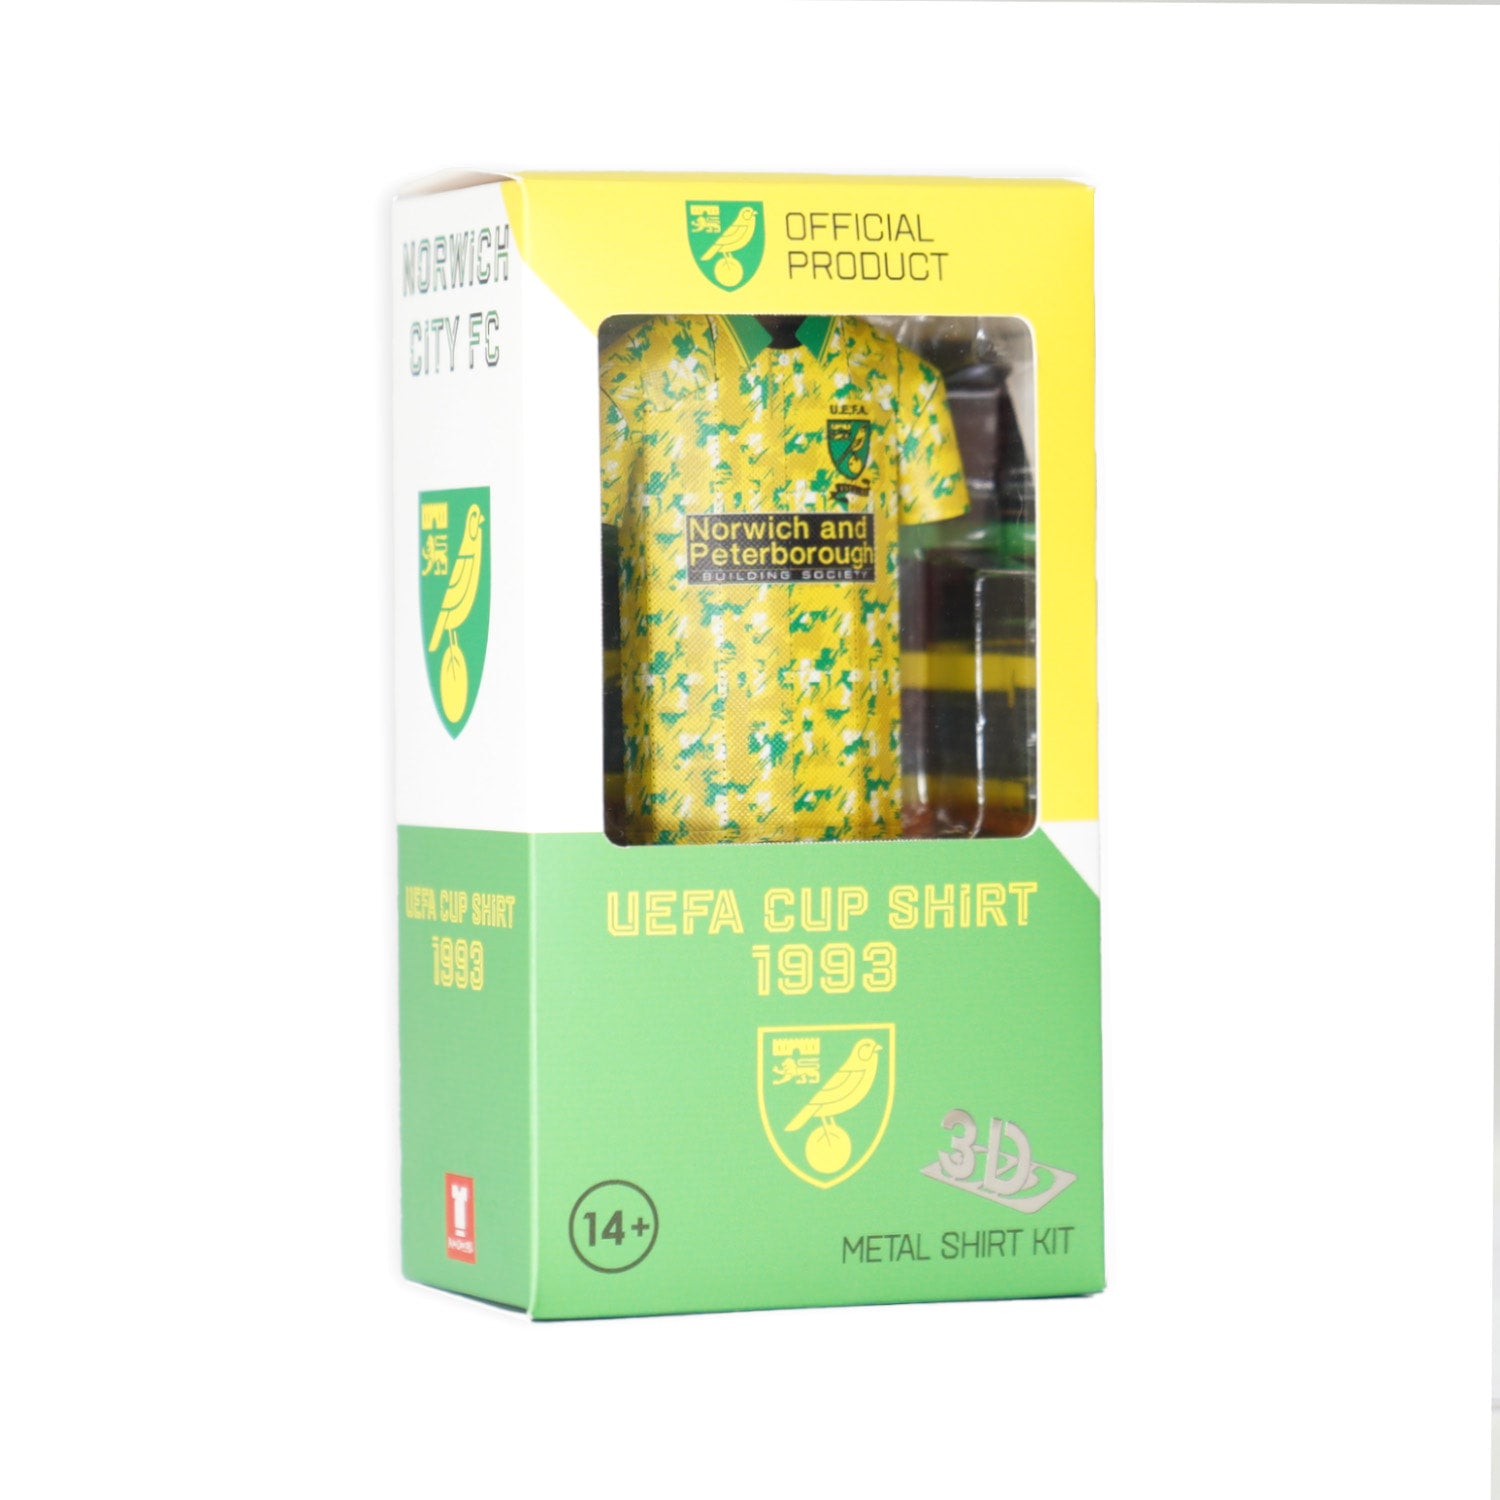 Norwich City 1993 UEFA Cup Shirt Collectible in packaging